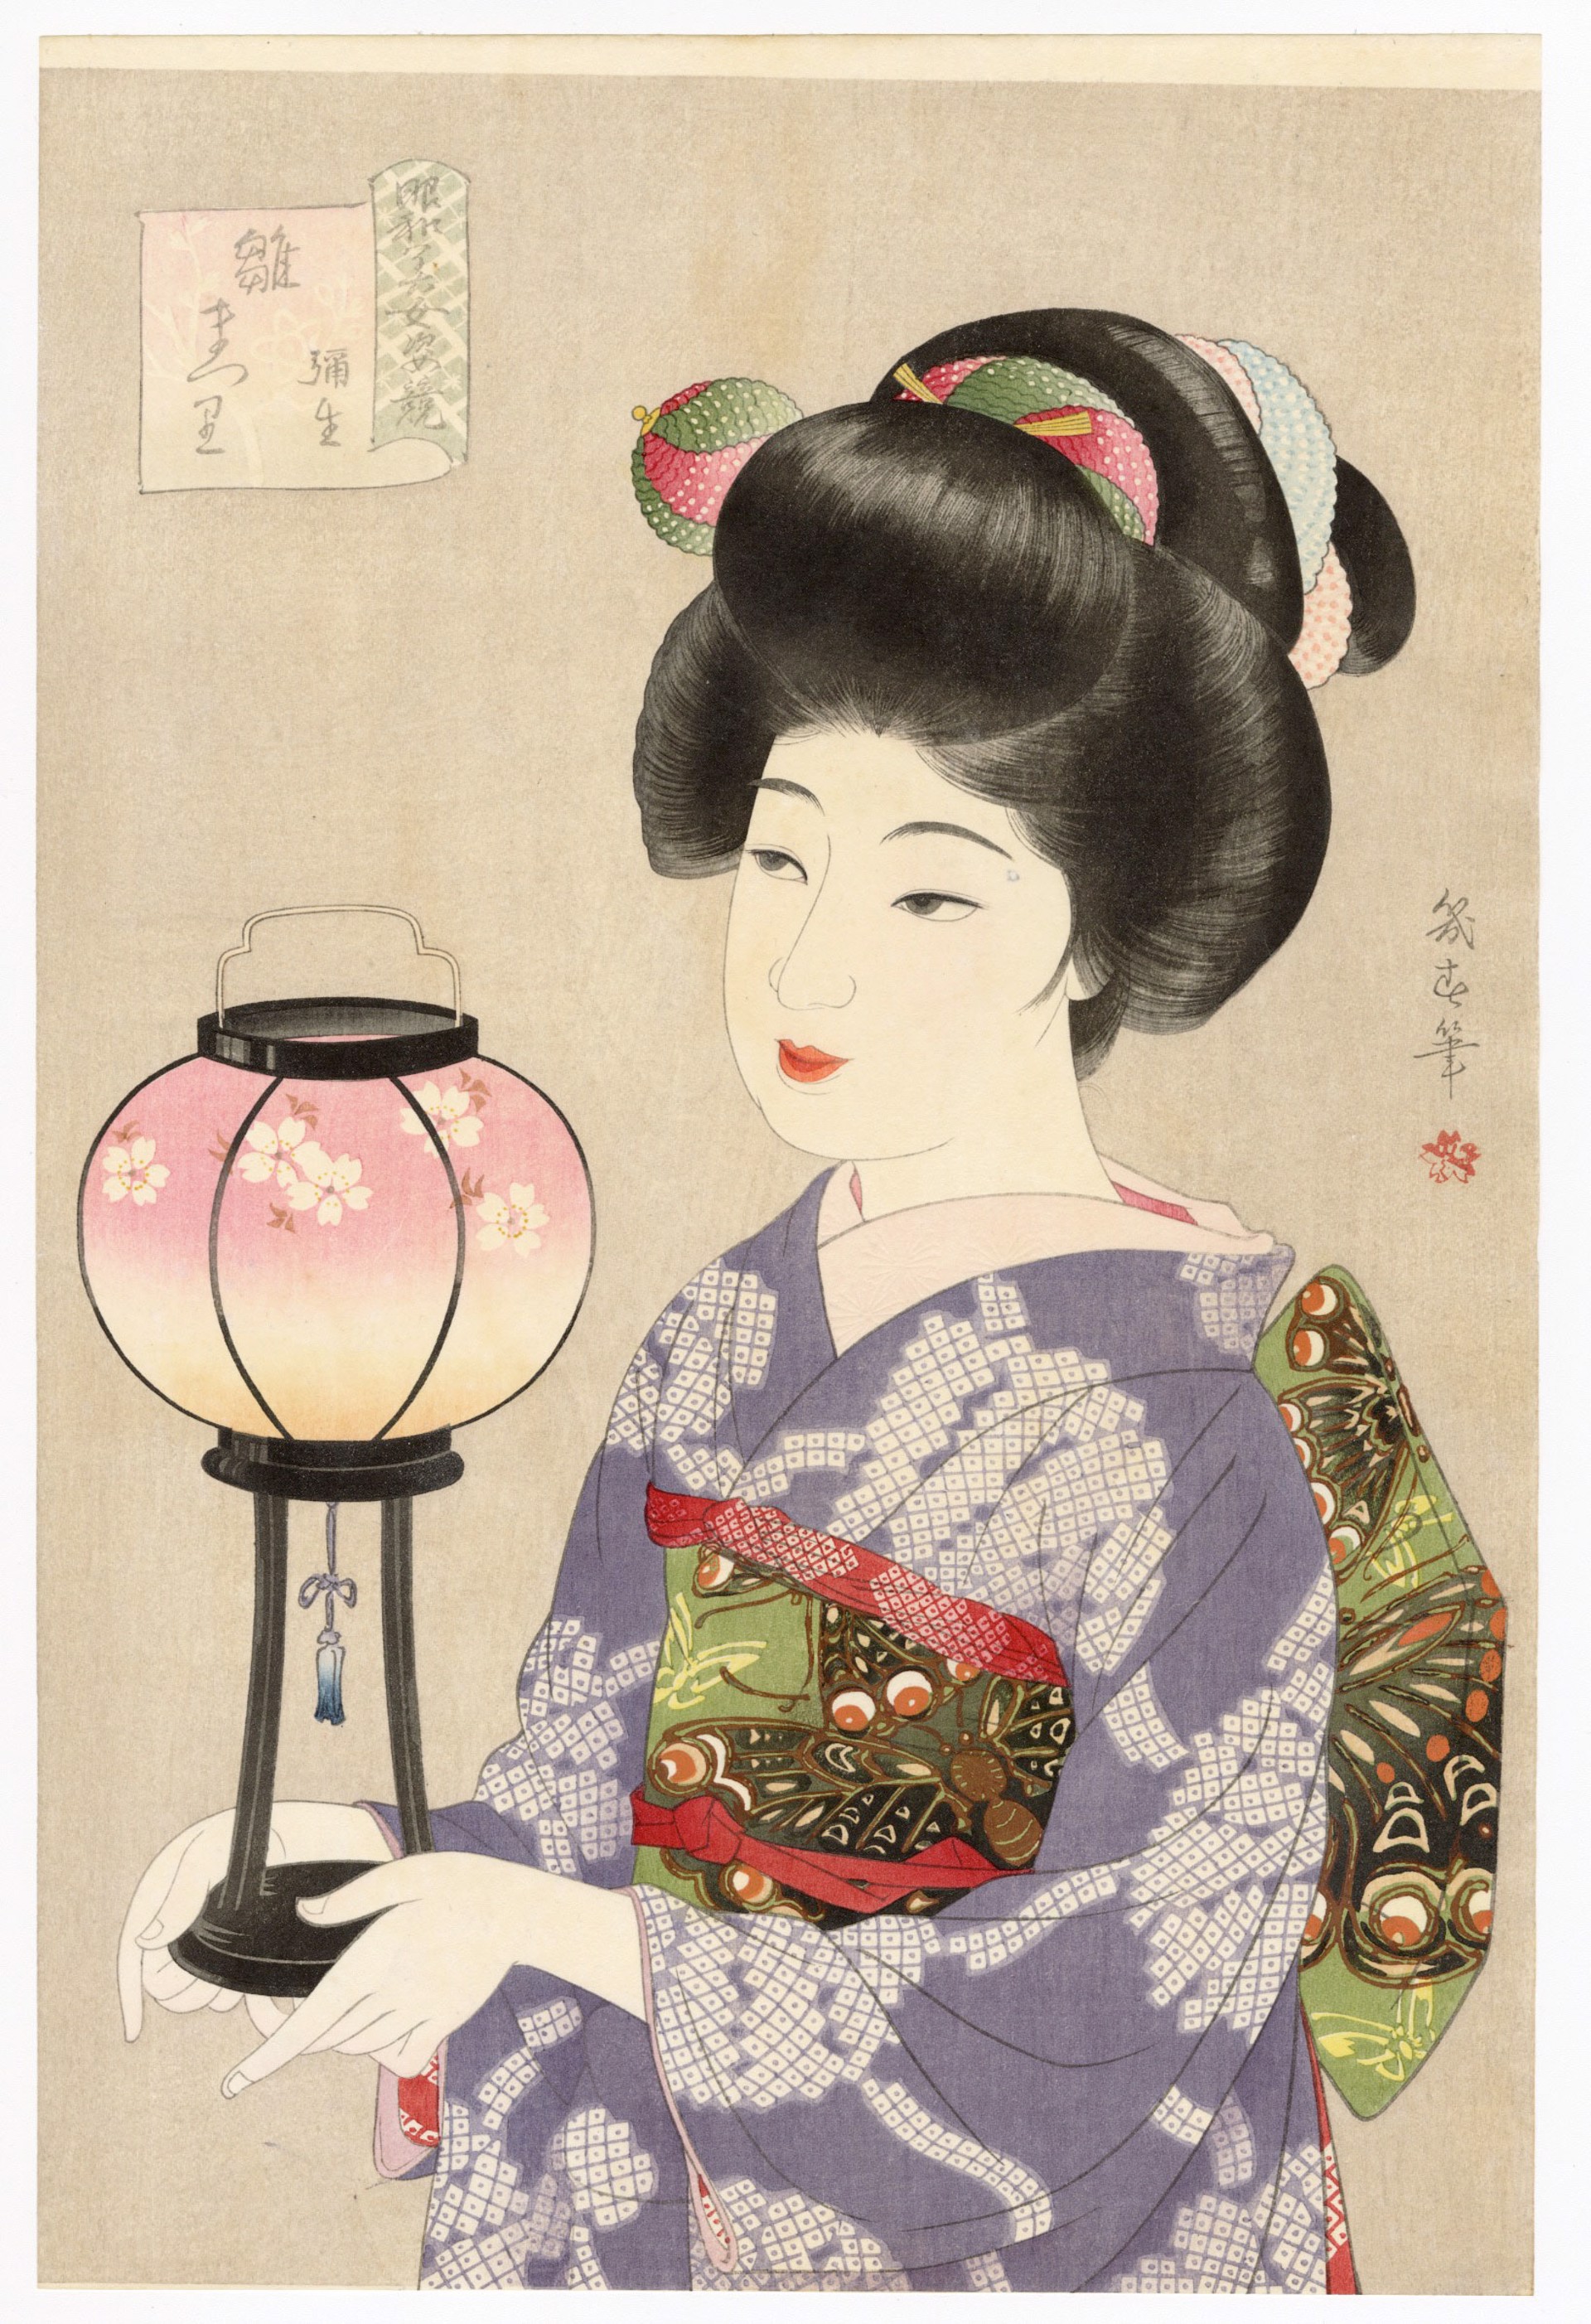 March - Girls Festival Competing Beauties in the Showa Era. by Watanabe Ikuharu